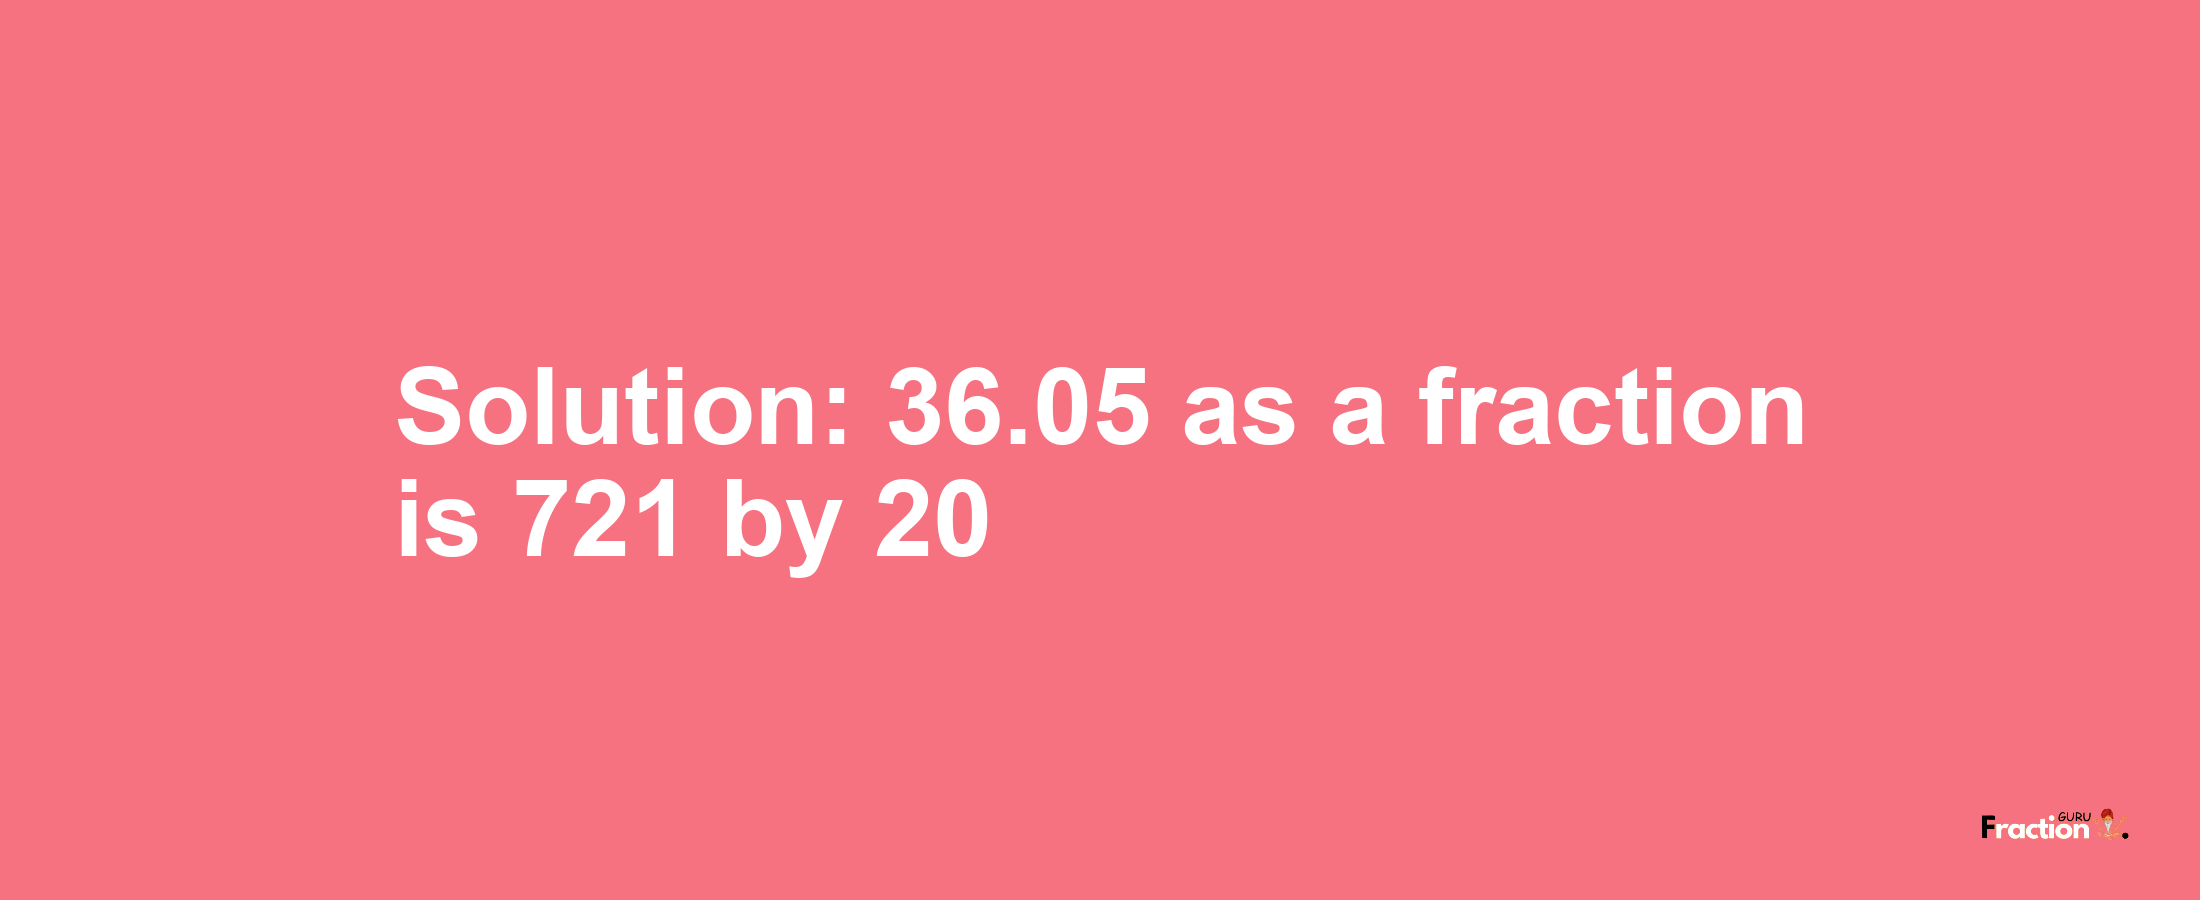 Solution:36.05 as a fraction is 721/20